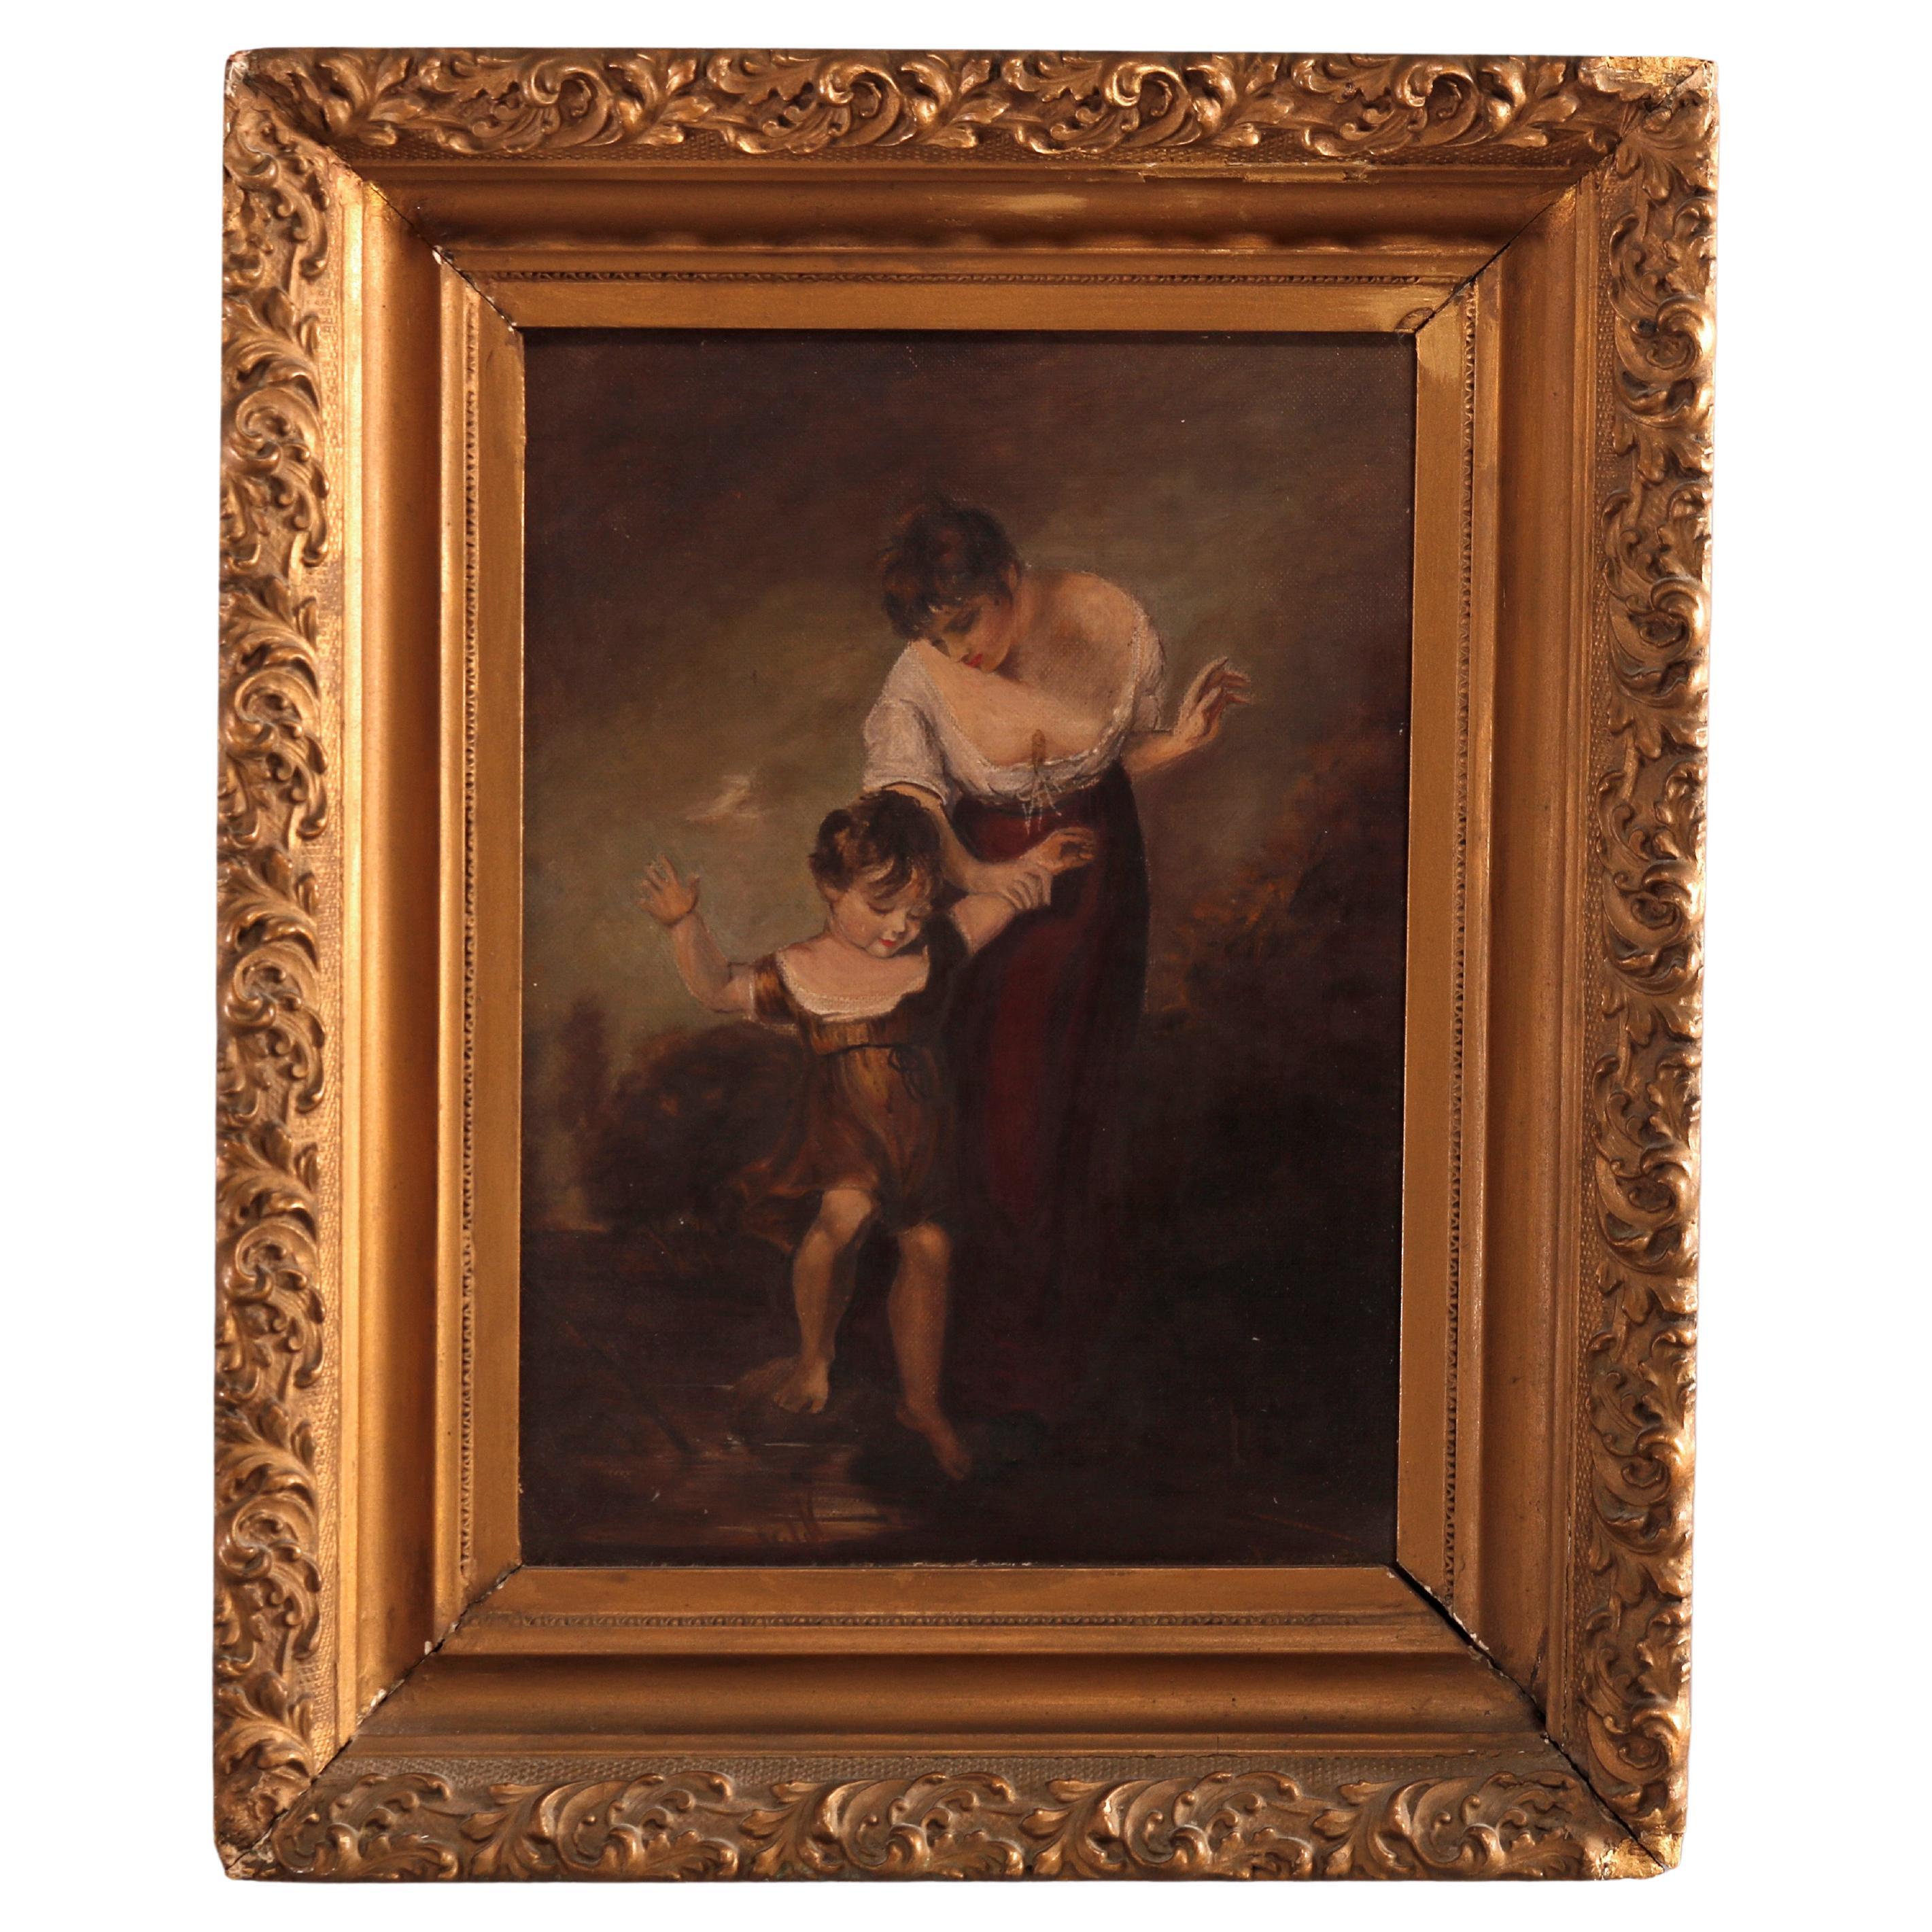 Antique Oil on Board Painting, Genre Scene of Woman & Child, Circa 1900